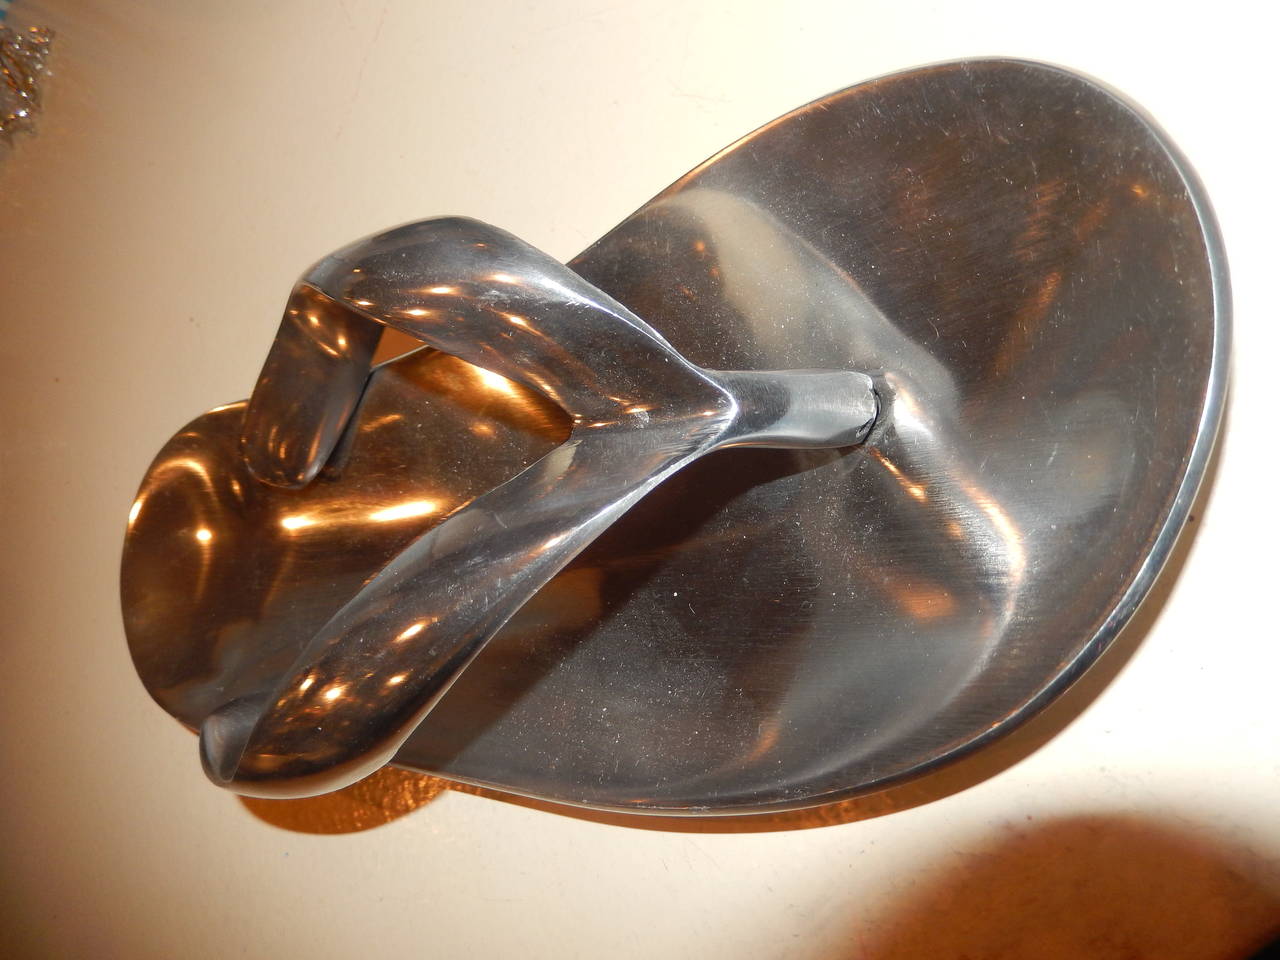 An artisan sculptural chrome flip flop, used as ashtray or paper weight.